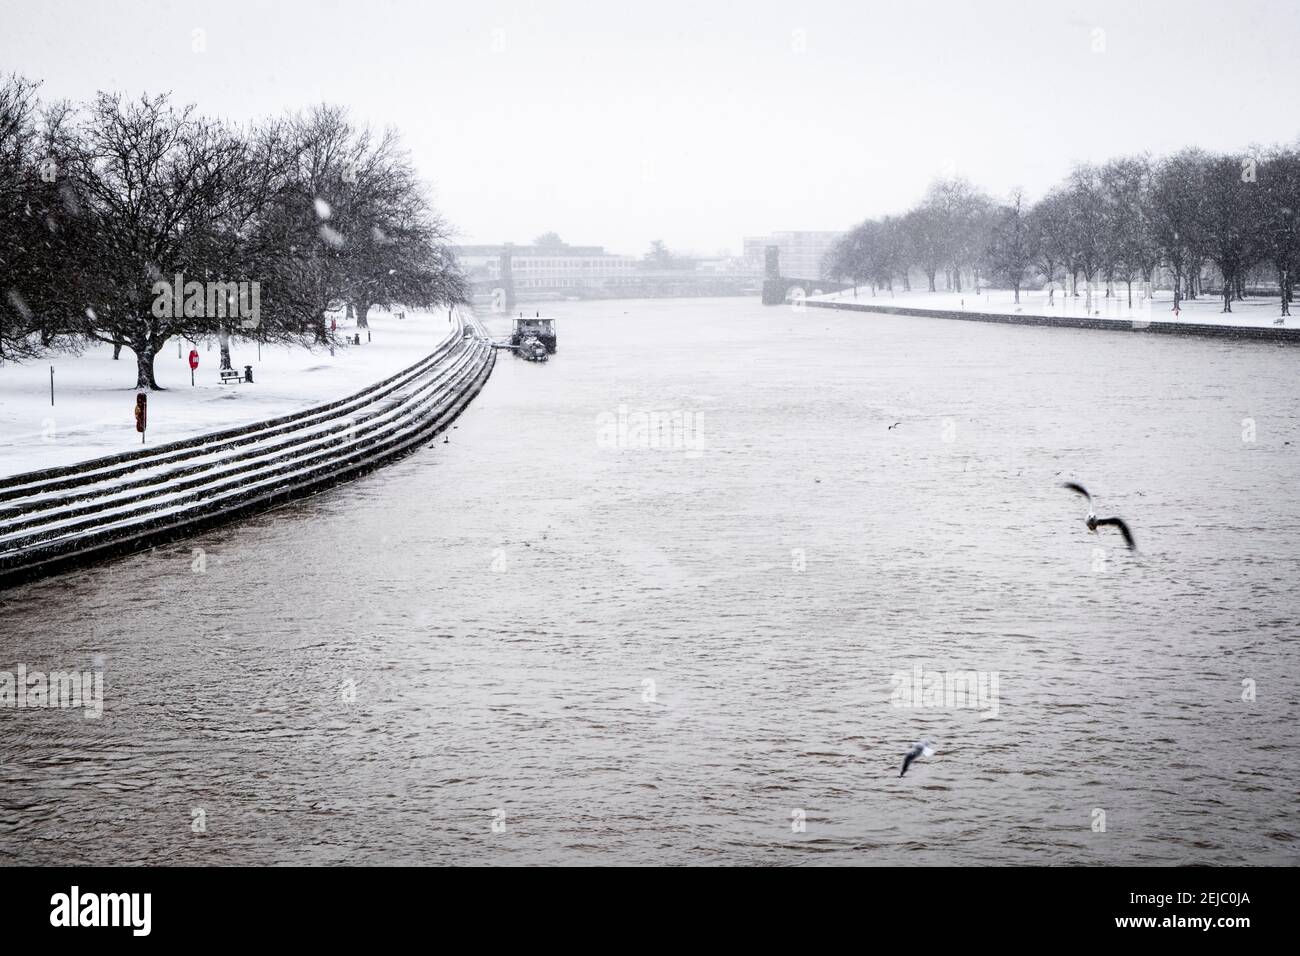 Snowing over the River Trent. A view from Trent Bridge on a cold day in winter with snow falling. Nottingham, England, UK Stock Photo